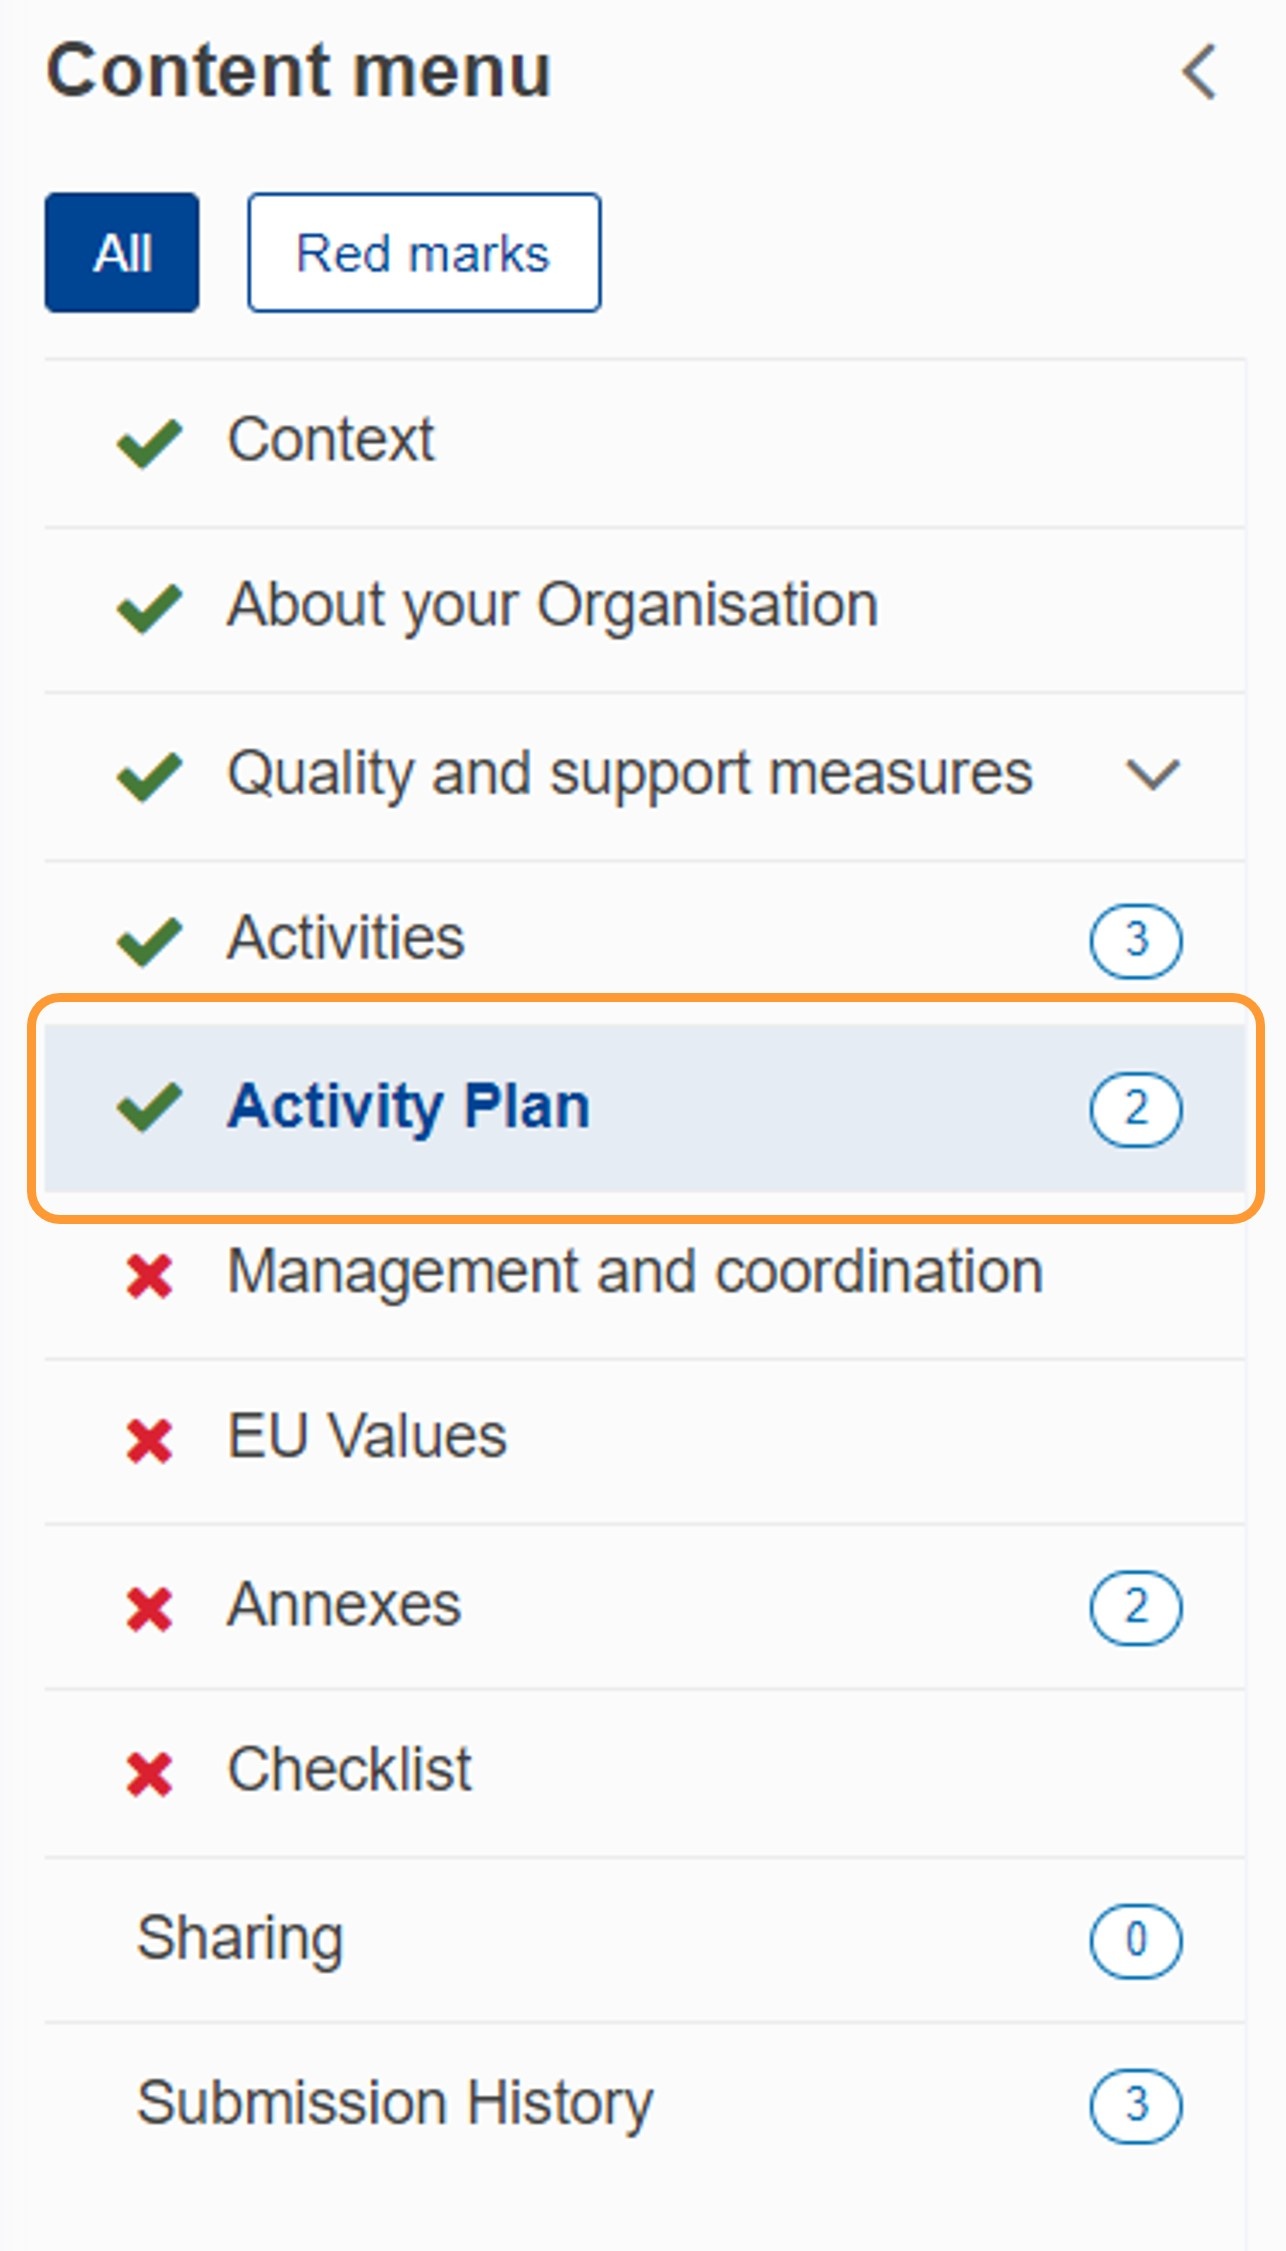 Activity Plan section is complete